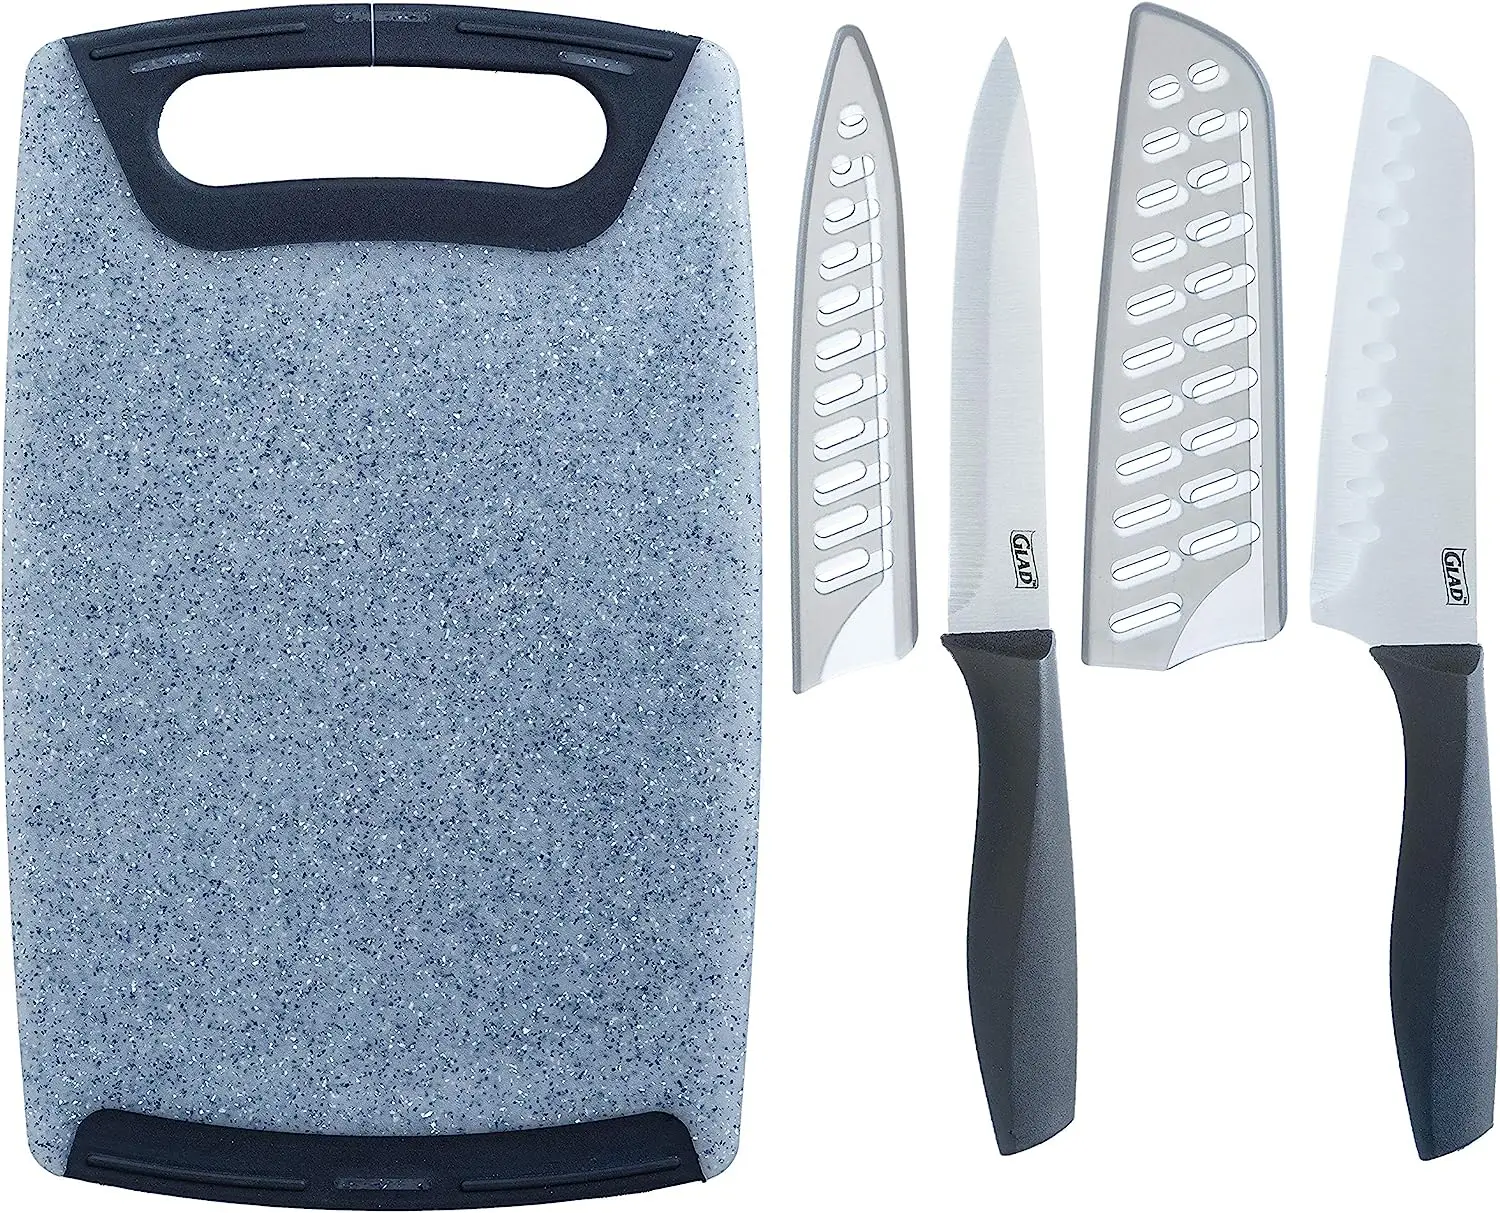 

Knives Set with Cutting Board, 5 Pieces | Sharp Santoku and Utility Knives with Blade Lids and Cutting Block | Kitchen Kitchen